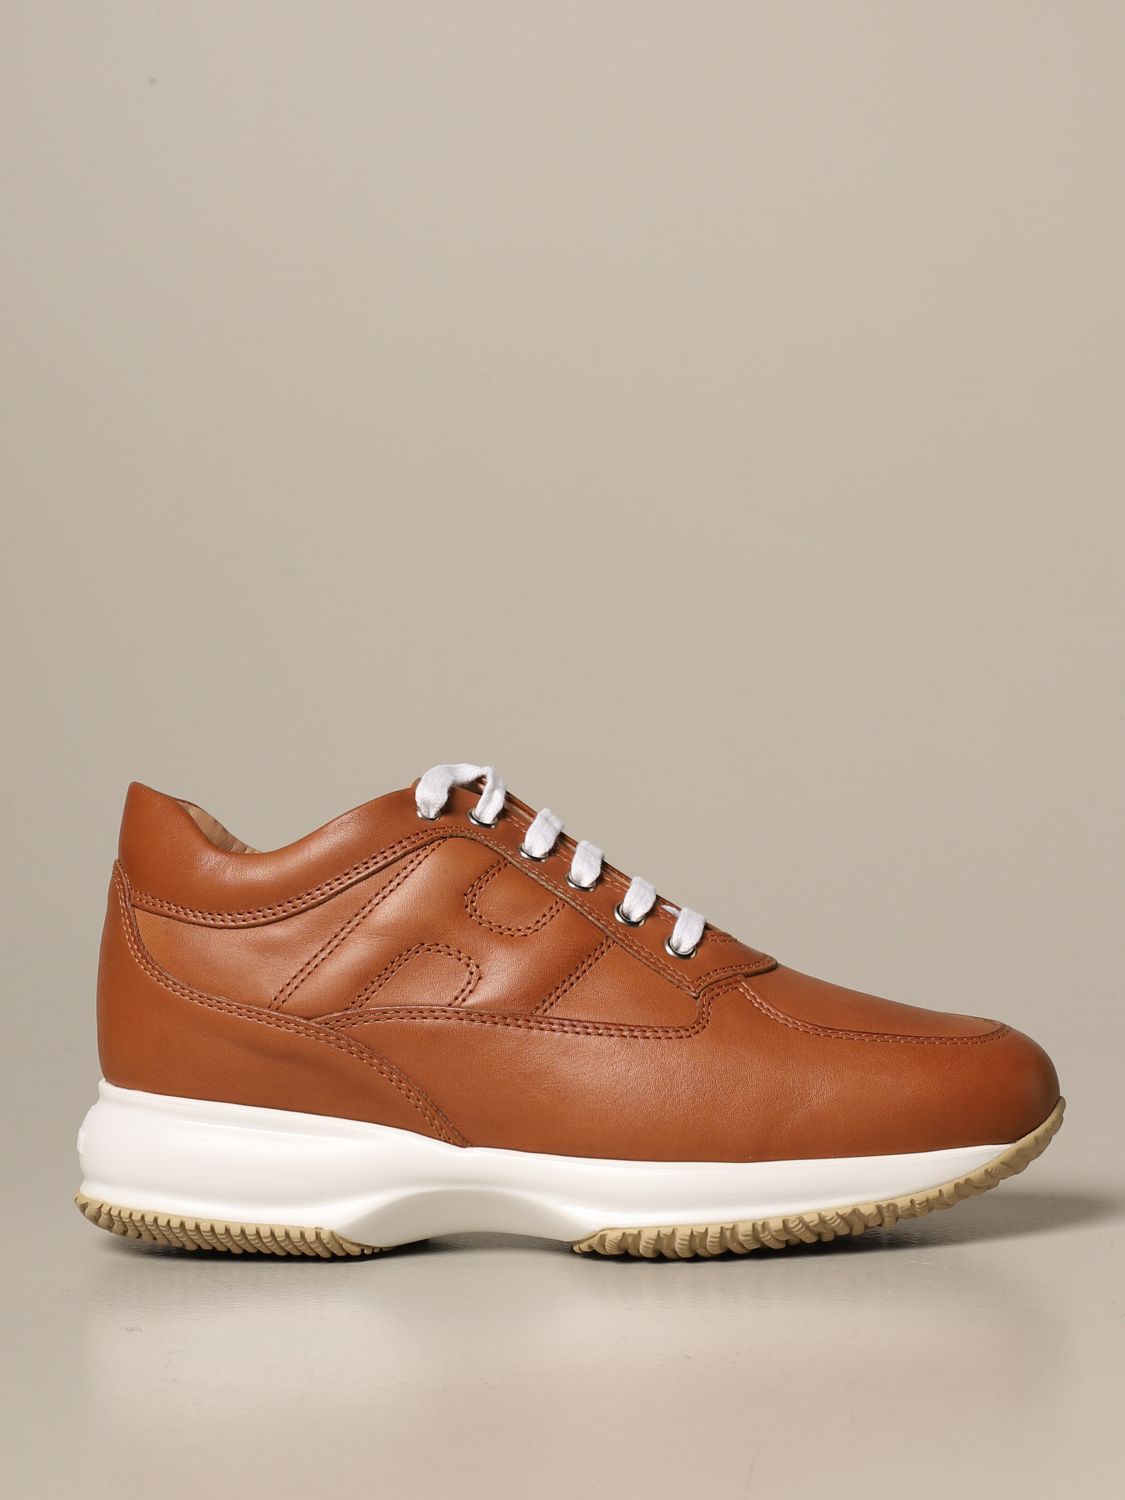 Hogan Outlet: Interactive in leather with rounded H | Sneakers Hogan Women Leather | Hogan HXW00N00010 O6L GIGLIO.COM